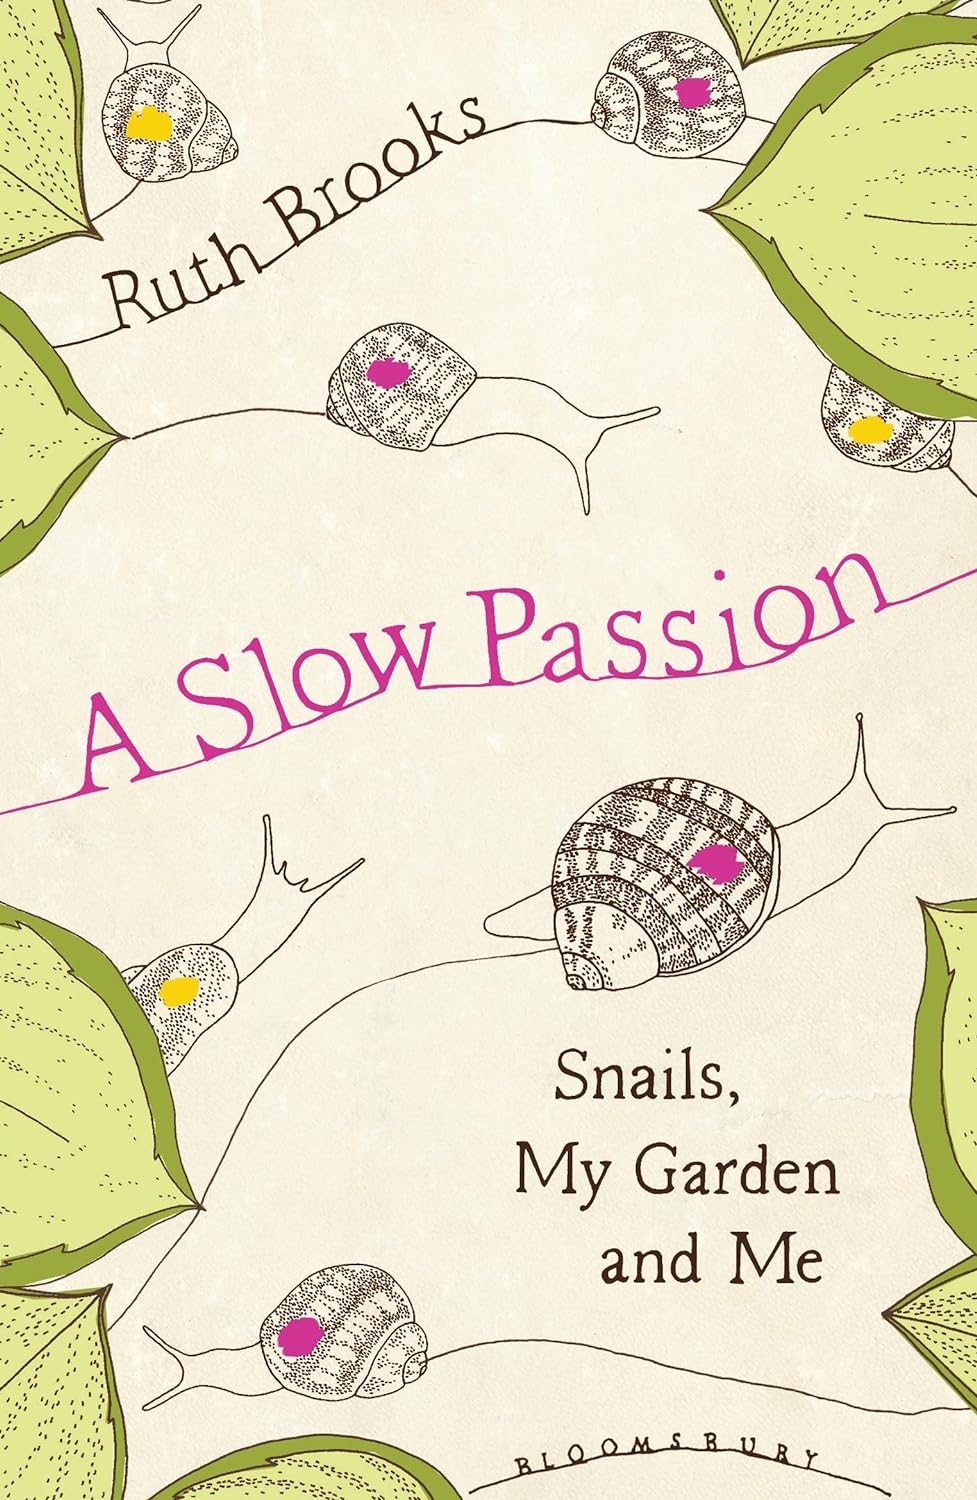 a slow passion Ruth Brooks